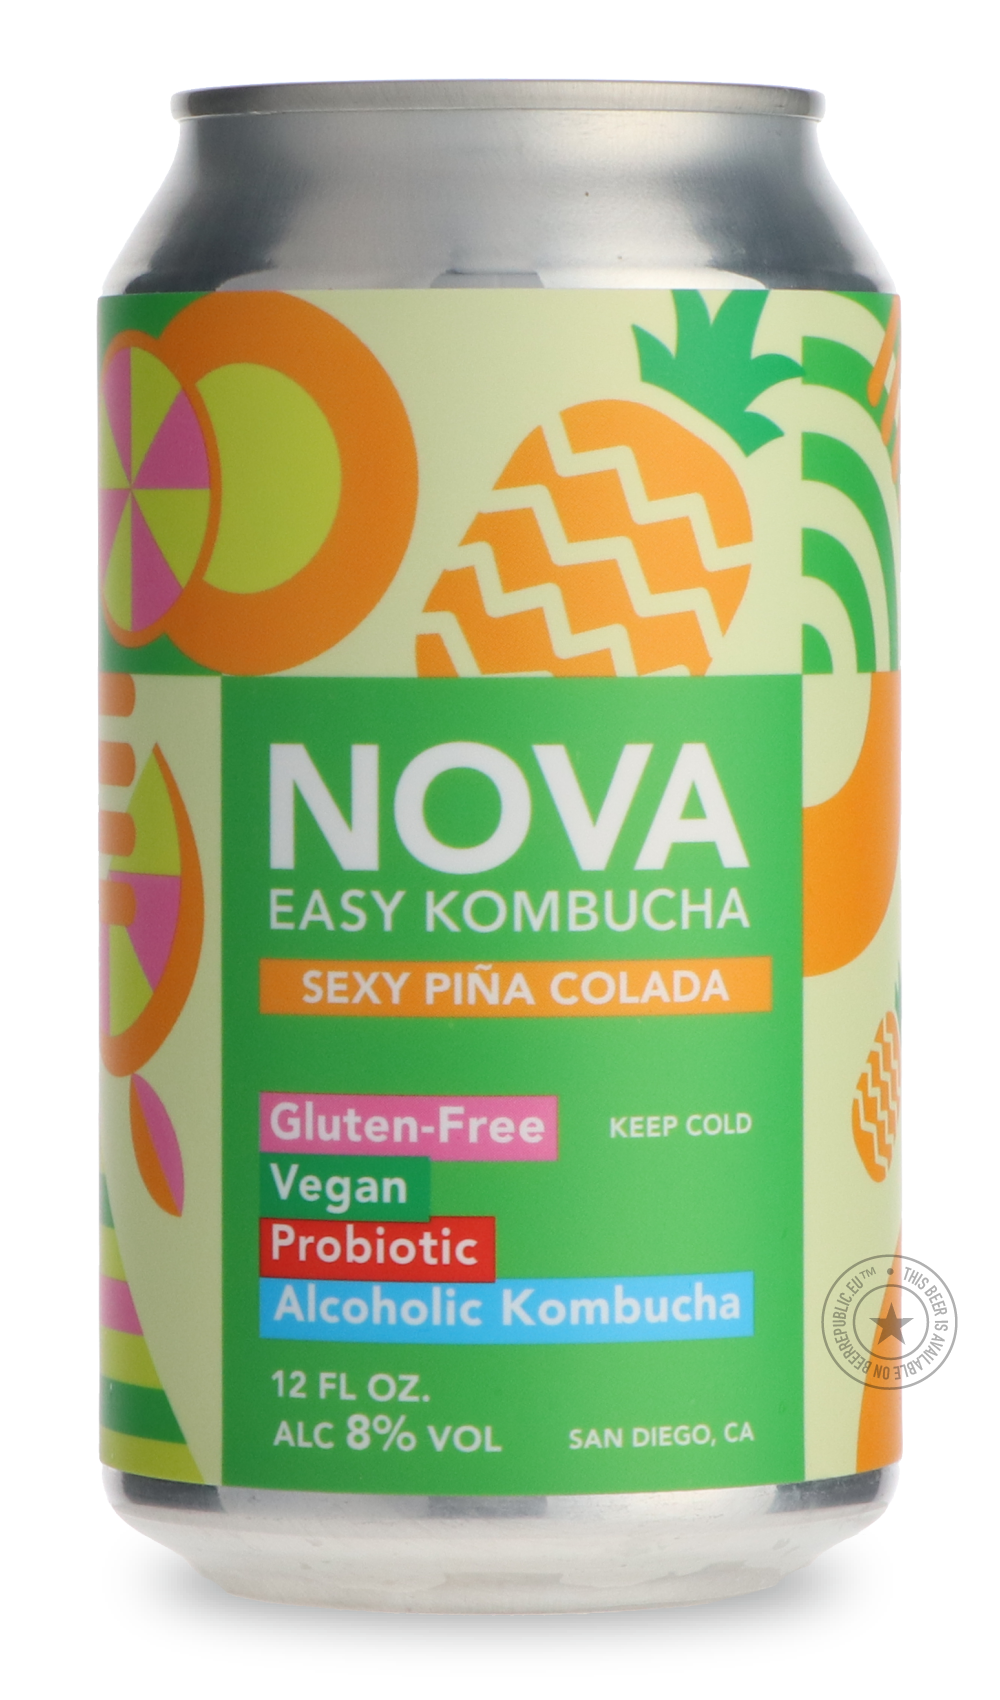 -Novo Brazil- NOVA Kombucha Sexy Piña Colada-Specials- Only @ Beer Republic - The best online beer store for American & Canadian craft beer - Buy beer online from the USA and Canada - Bier online kopen - Amerikaans bier kopen - Craft beer store - Craft beer kopen - Amerikanisch bier kaufen - Bier online kaufen - Acheter biere online - IPA - Stout - Porter - New England IPA - Hazy IPA - Imperial Stout - Barrel Aged - Barrel Aged Imperial Stout - Brown - Dark beer - Blond - Blonde - Pilsner - Lager - Wheat - 